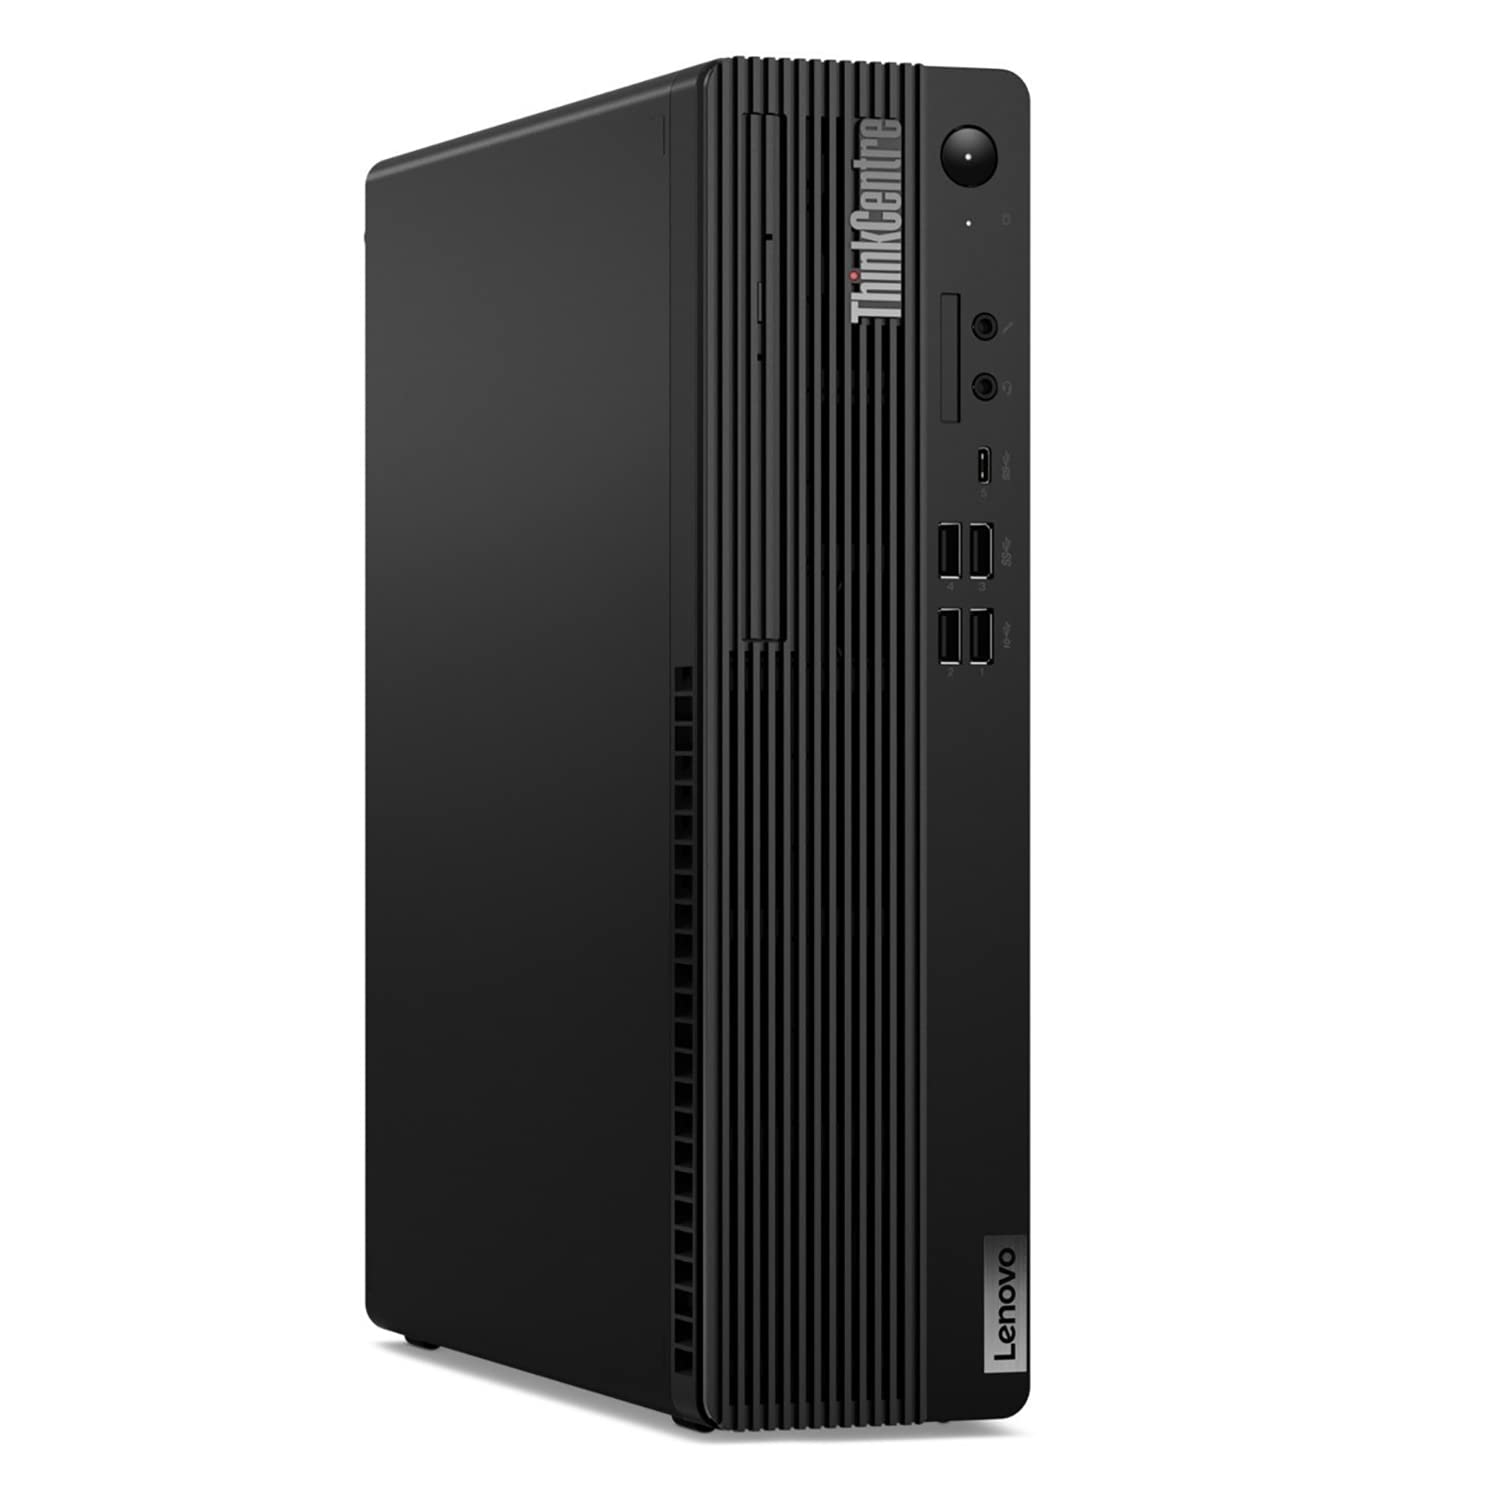 Lenovo ThinkCentre M80s SFF Business Desktop, Intel Hexa-Core i5-10500 up to 4.3GHz (Beat i7-8700), 32GB DDR4 RAM, 2TB PCIe SSD, DVDRW, Ethernet, WiFi Adapter, Windows 10 Pro, BROAG Extension Cable